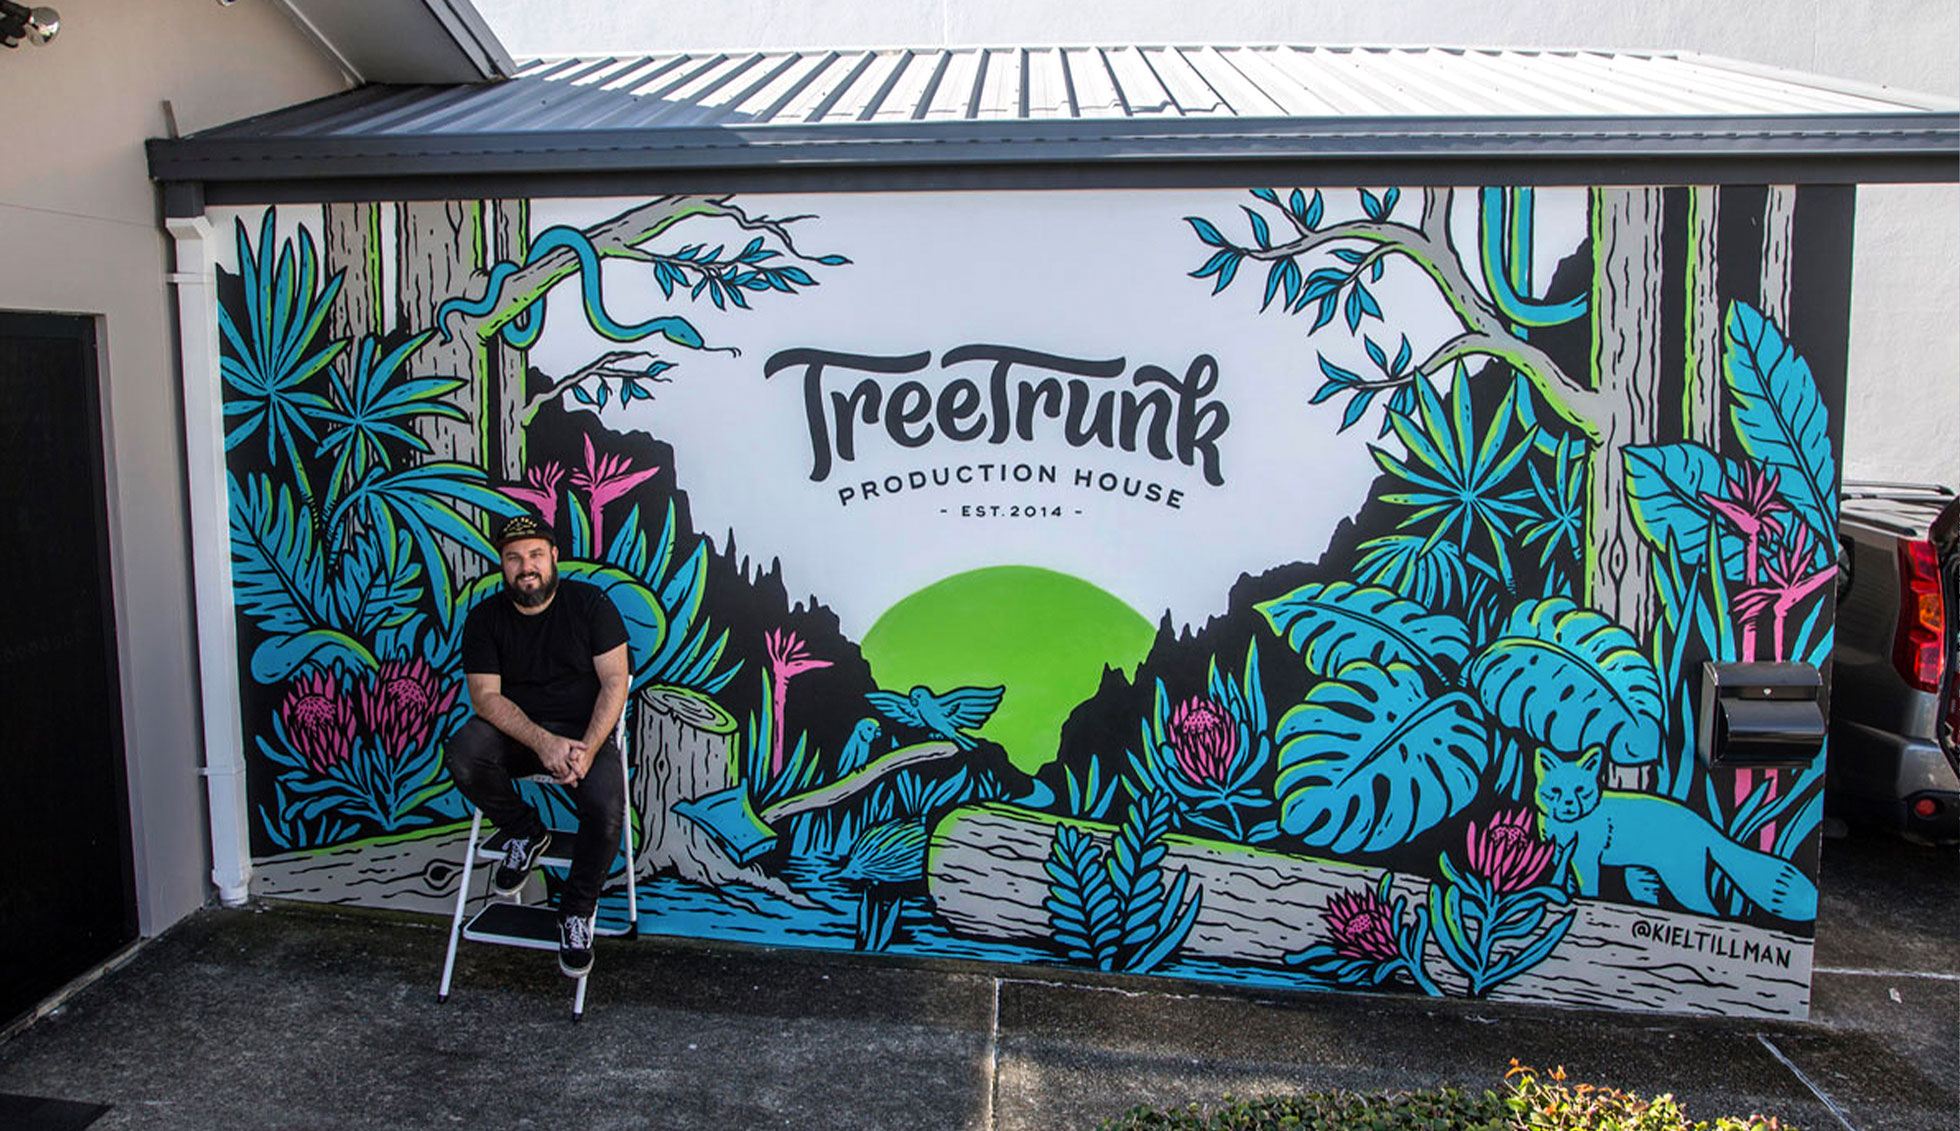 Mural artist Kiel Tillman sits infront of his finished mural featuring the Treetrunk logo and a vibrant jungle scene